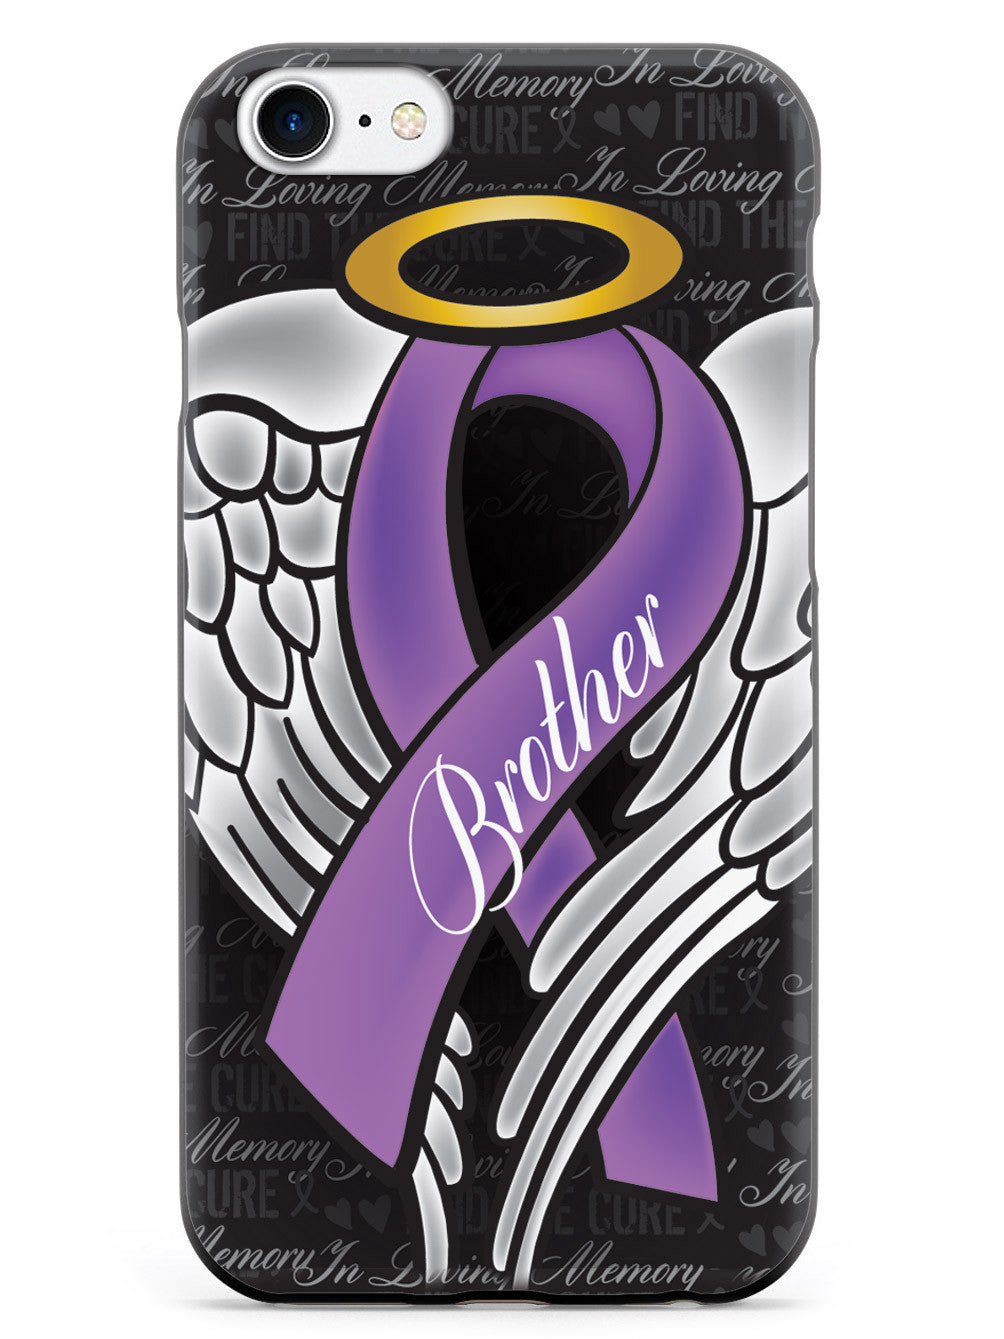 In Loving Memory of My Brother - Purple Ribbon Case